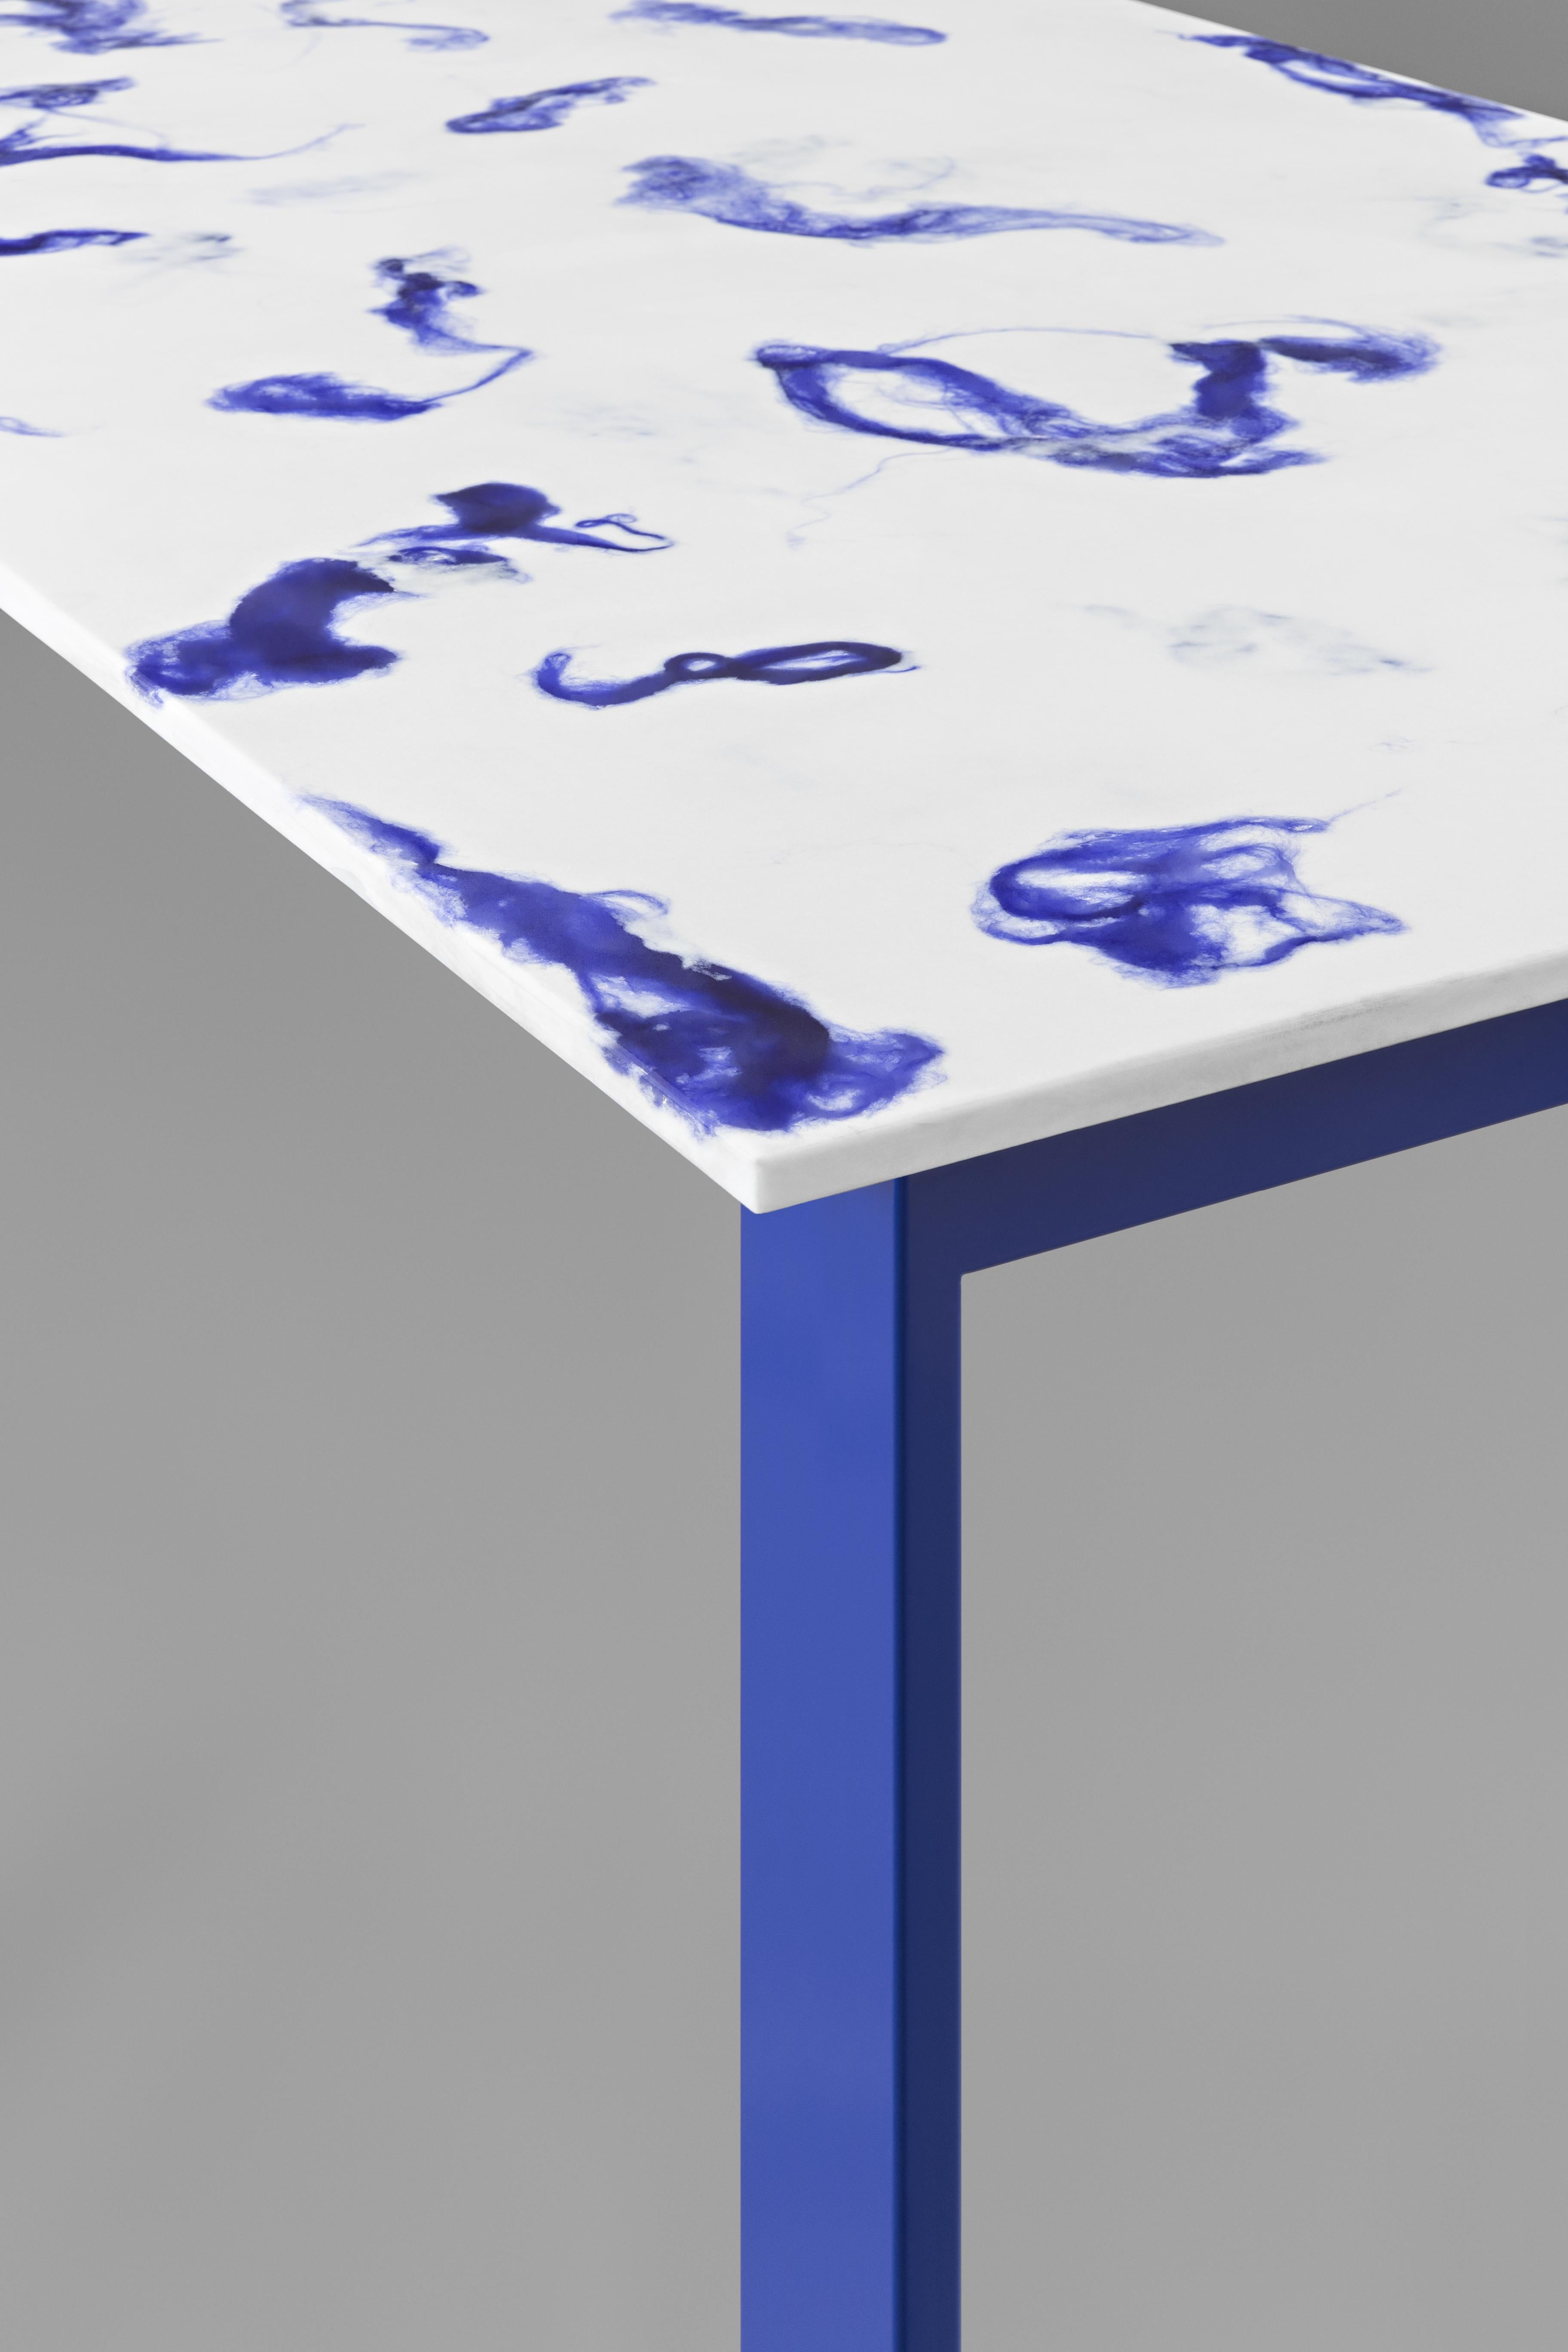 Italian Contemporary Marco Guazzini Dining Table Carrara Marble Wool Effect Blue White For Sale